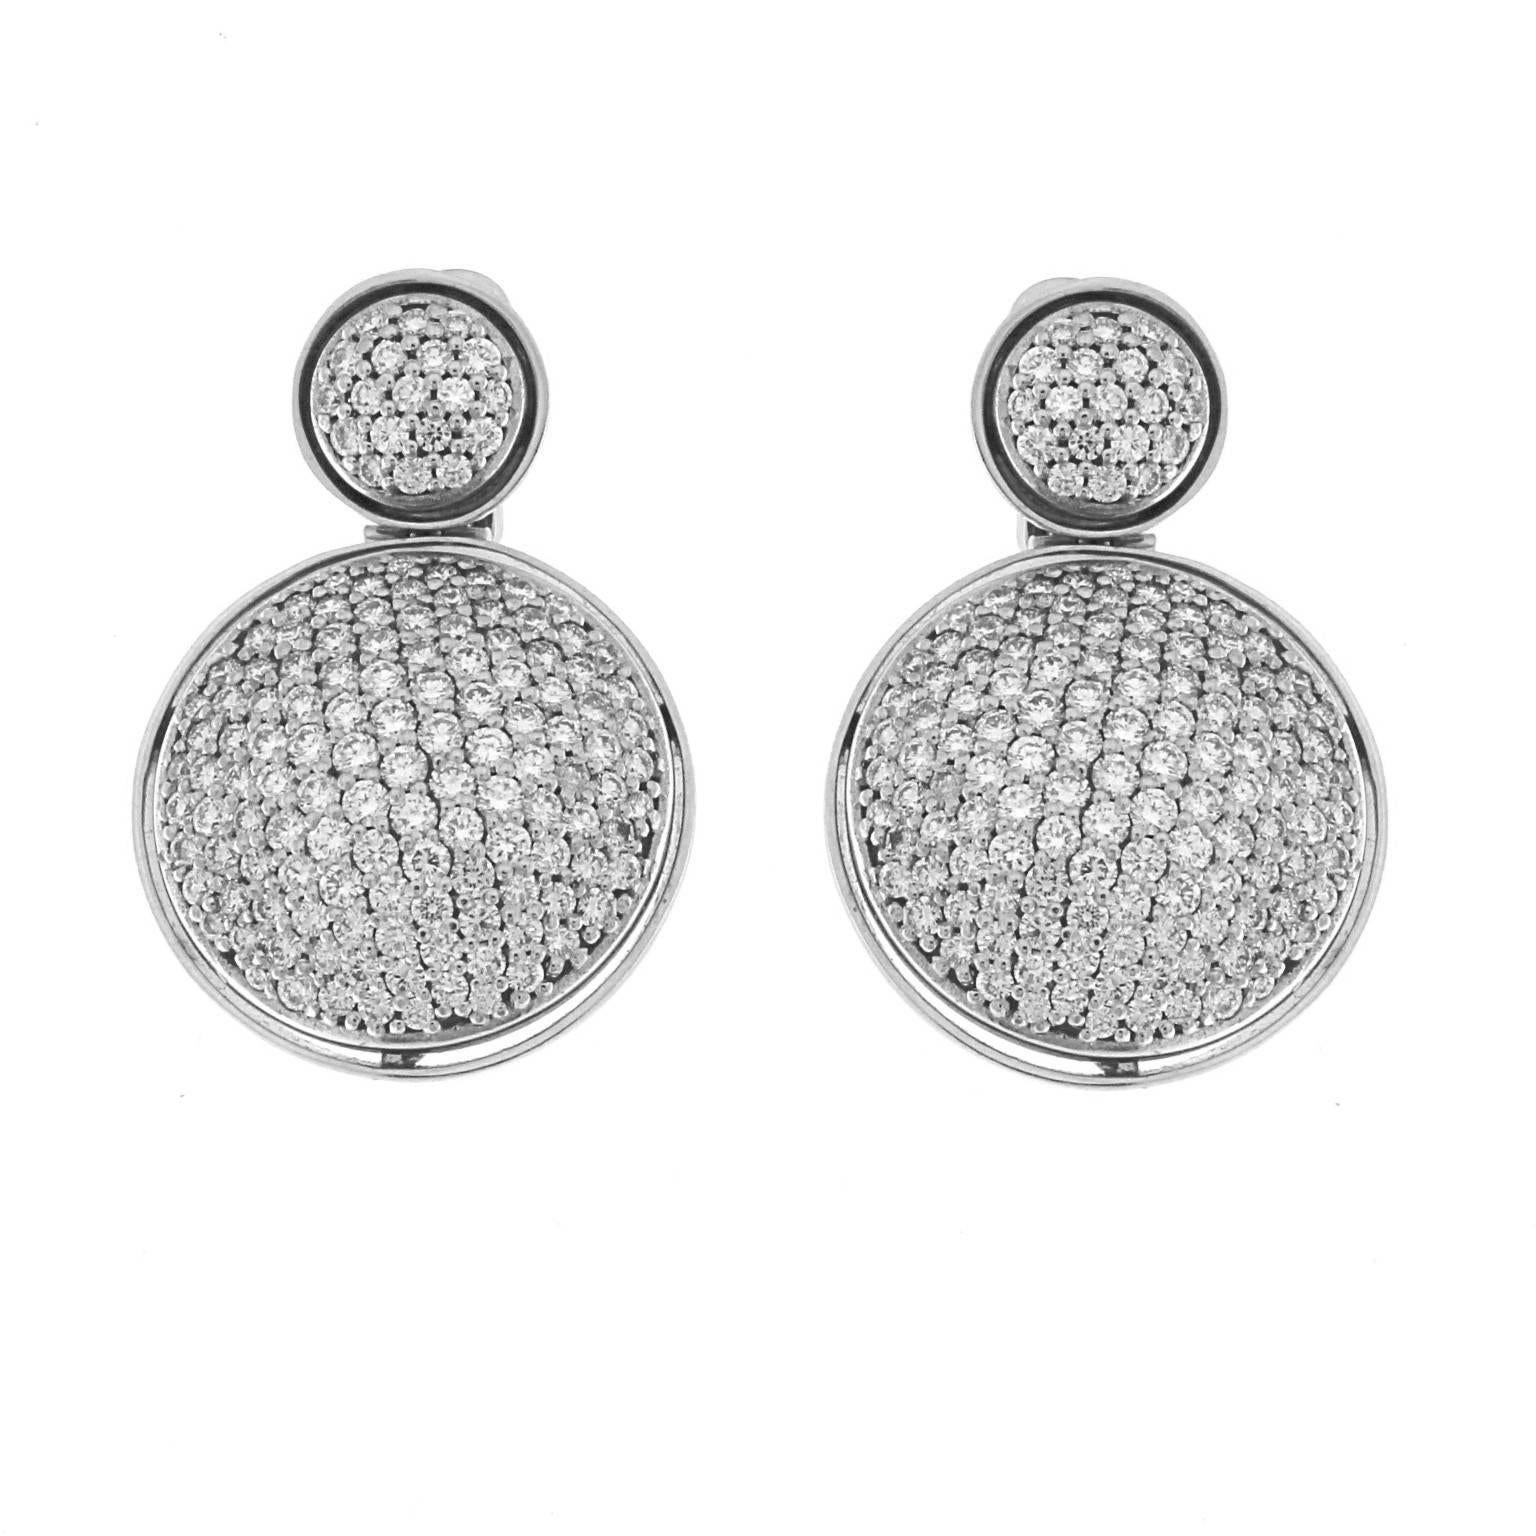 Wonderful pair of 18ct white gold earrings and white diamonds born from the 